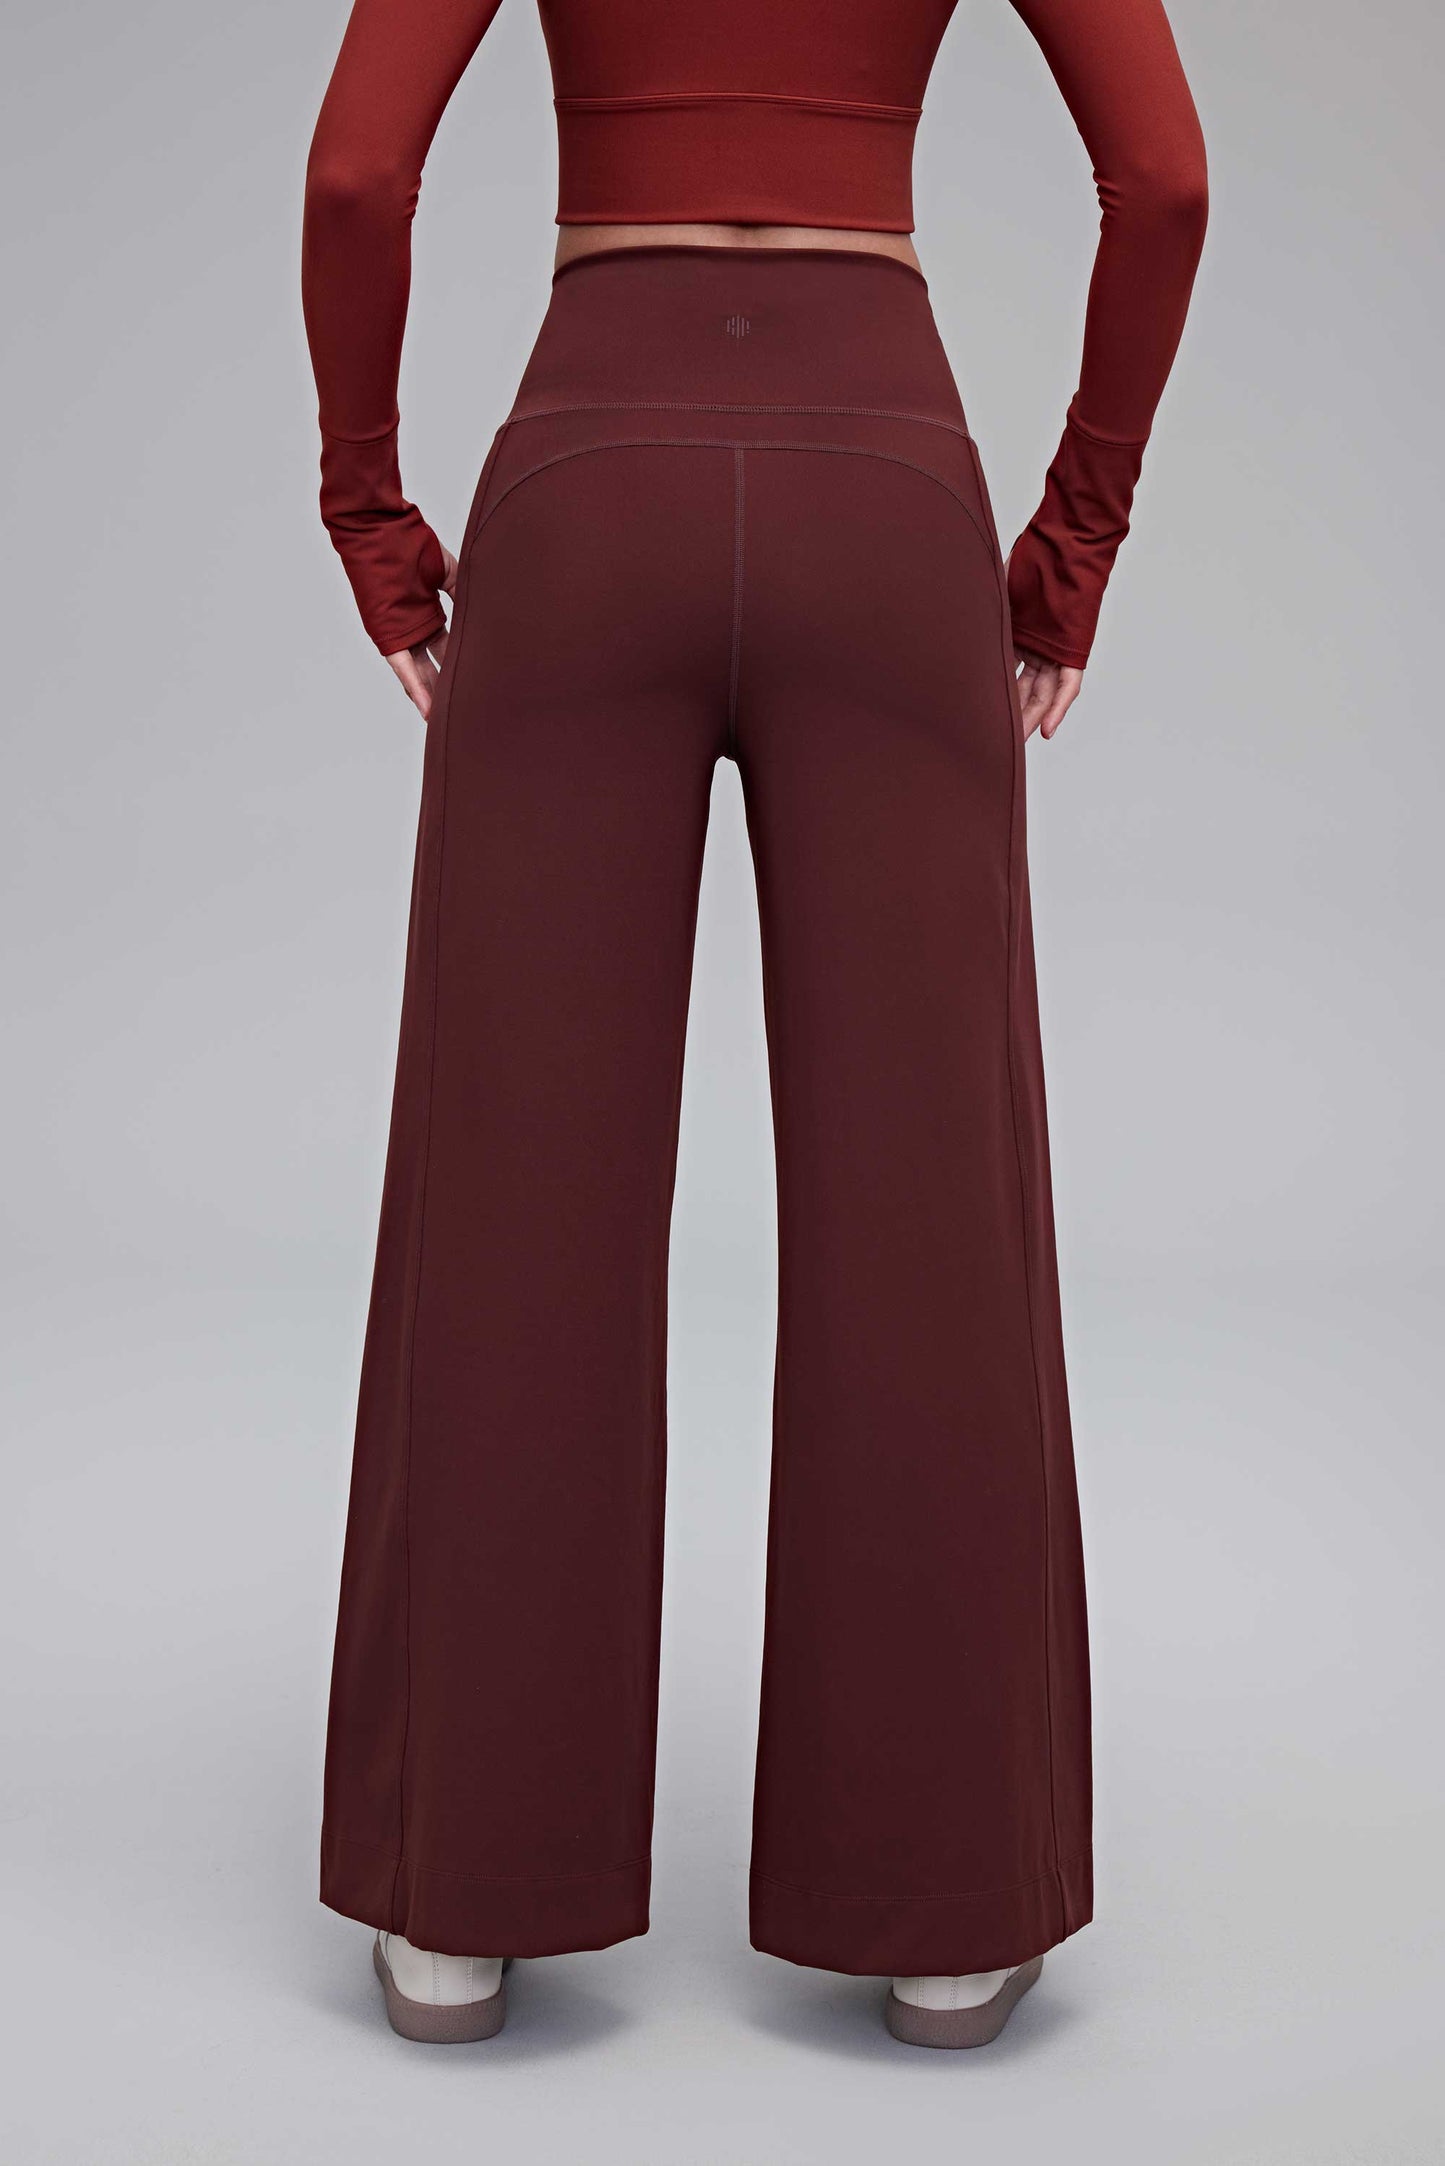 back of the red pants